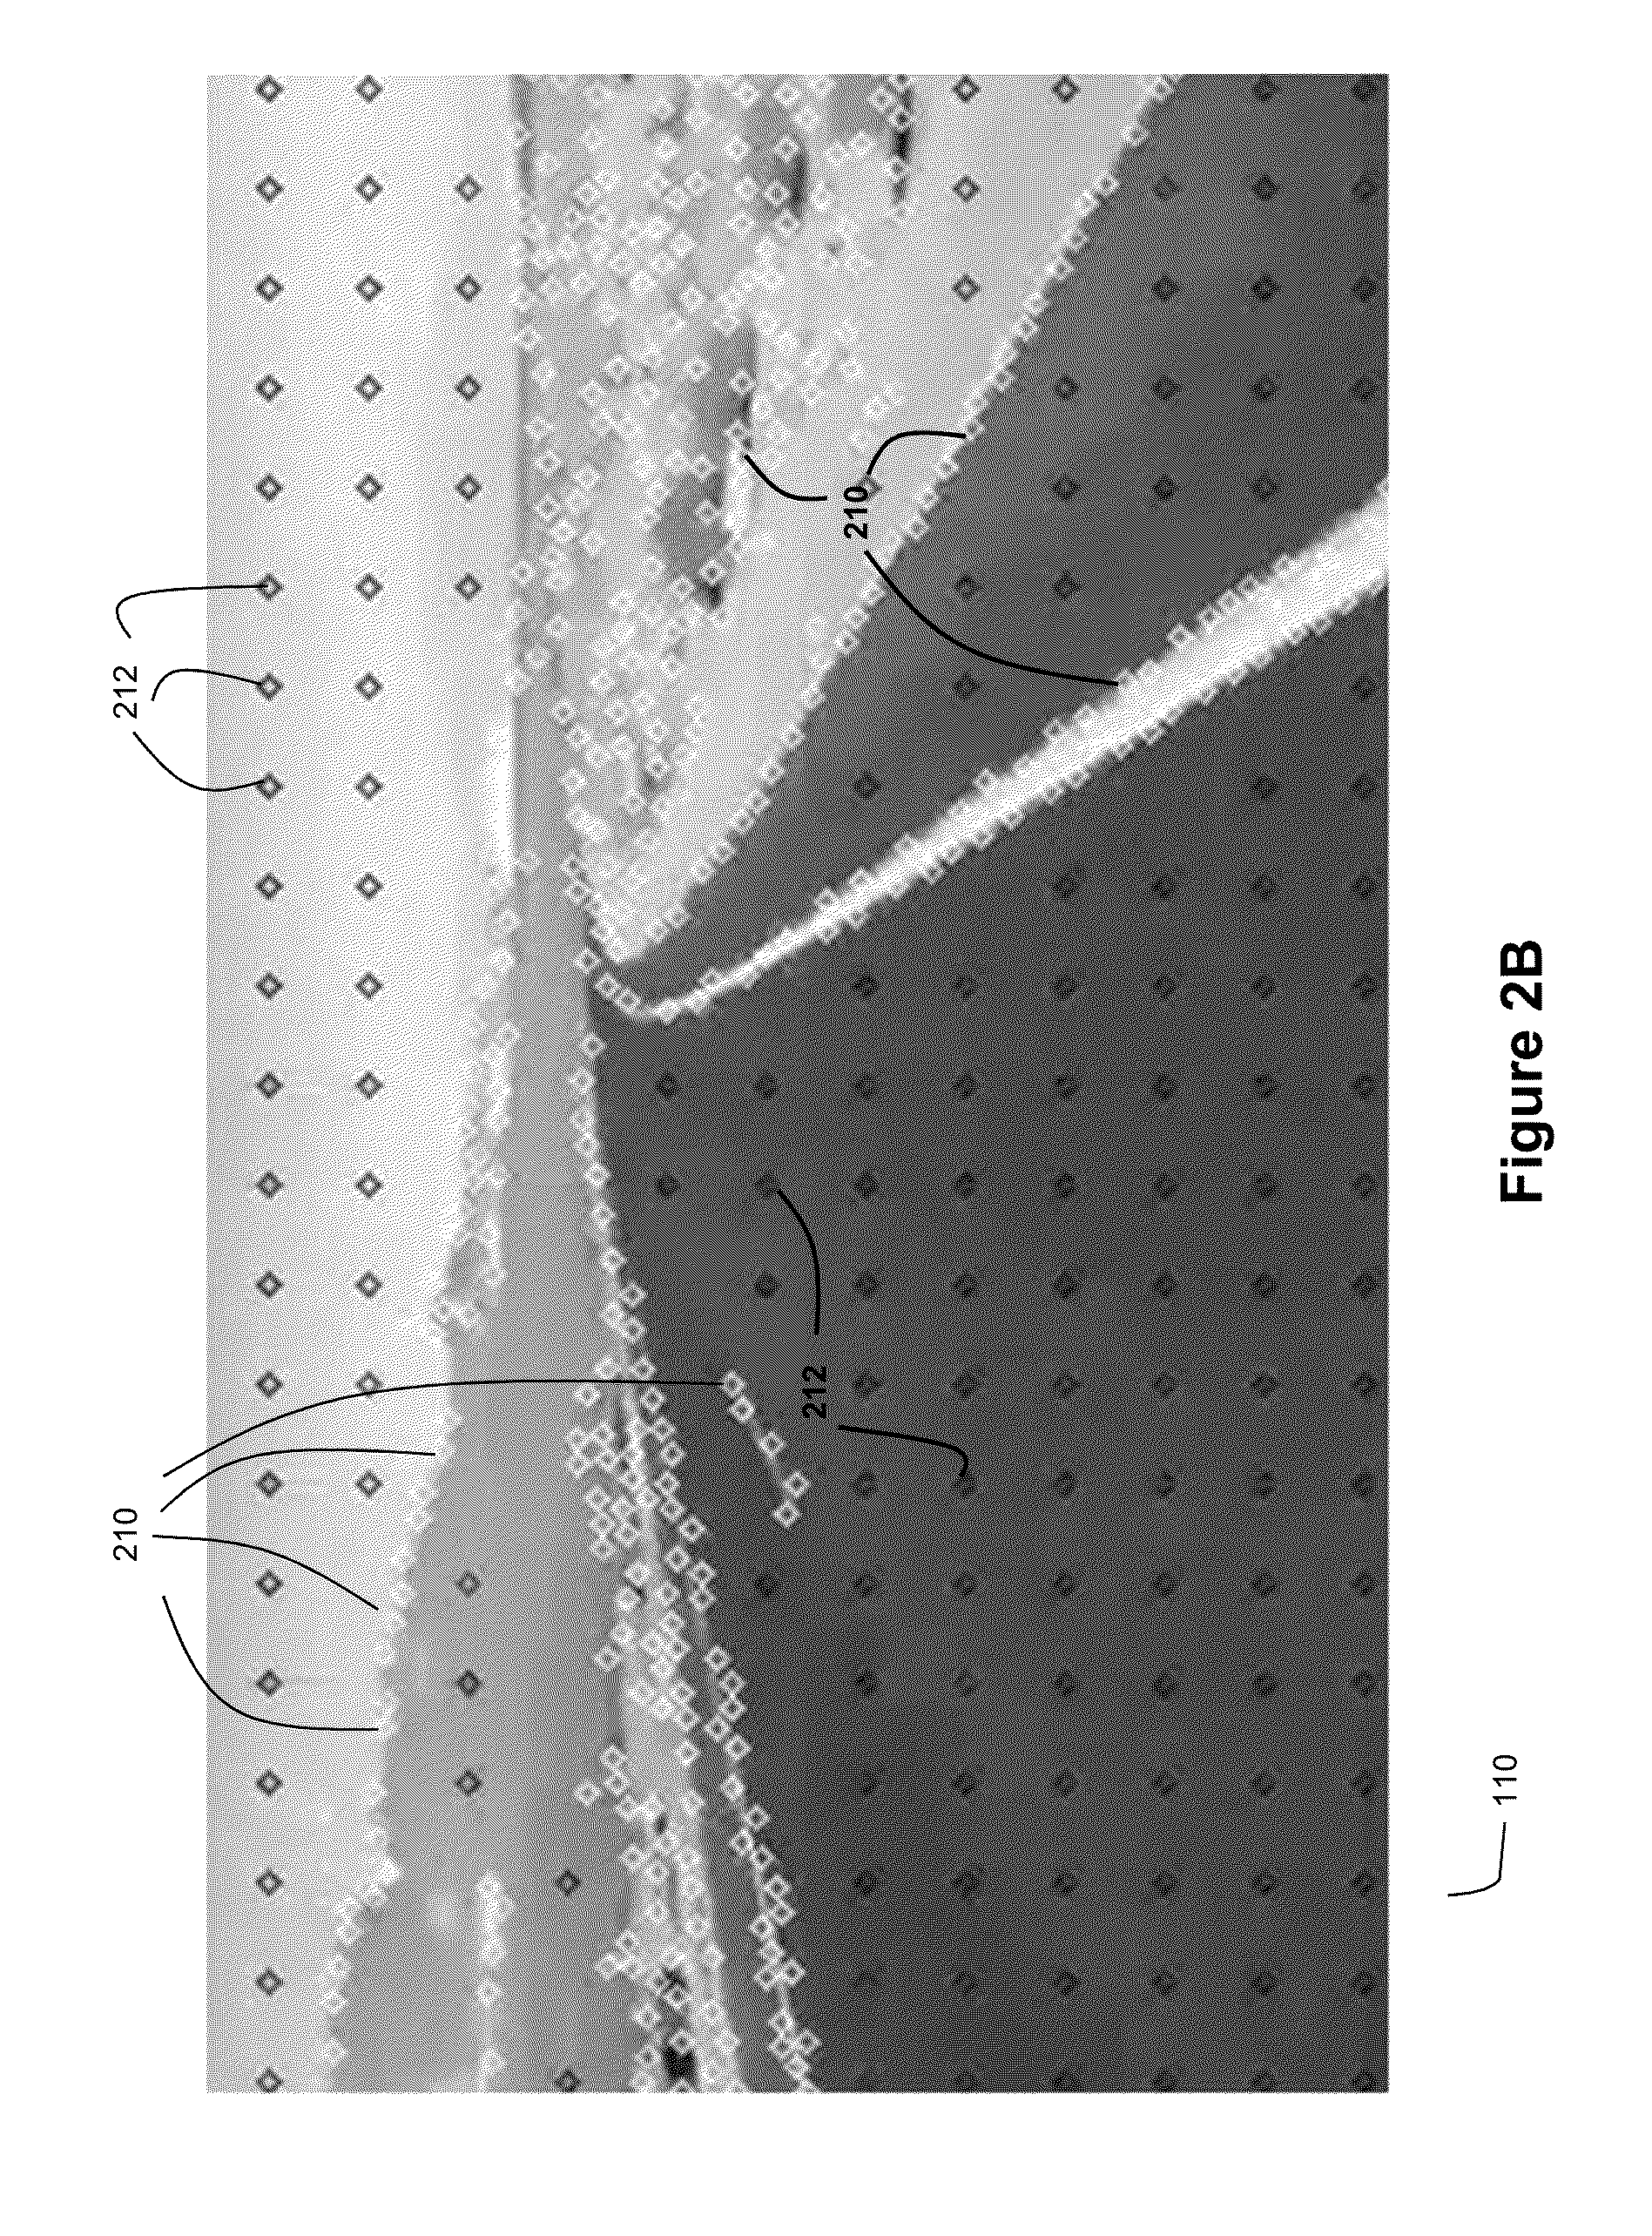 Method and System for Ladar Transmission Employing Dynamic Scan Patterns with Macro Patterns and Base Patterns